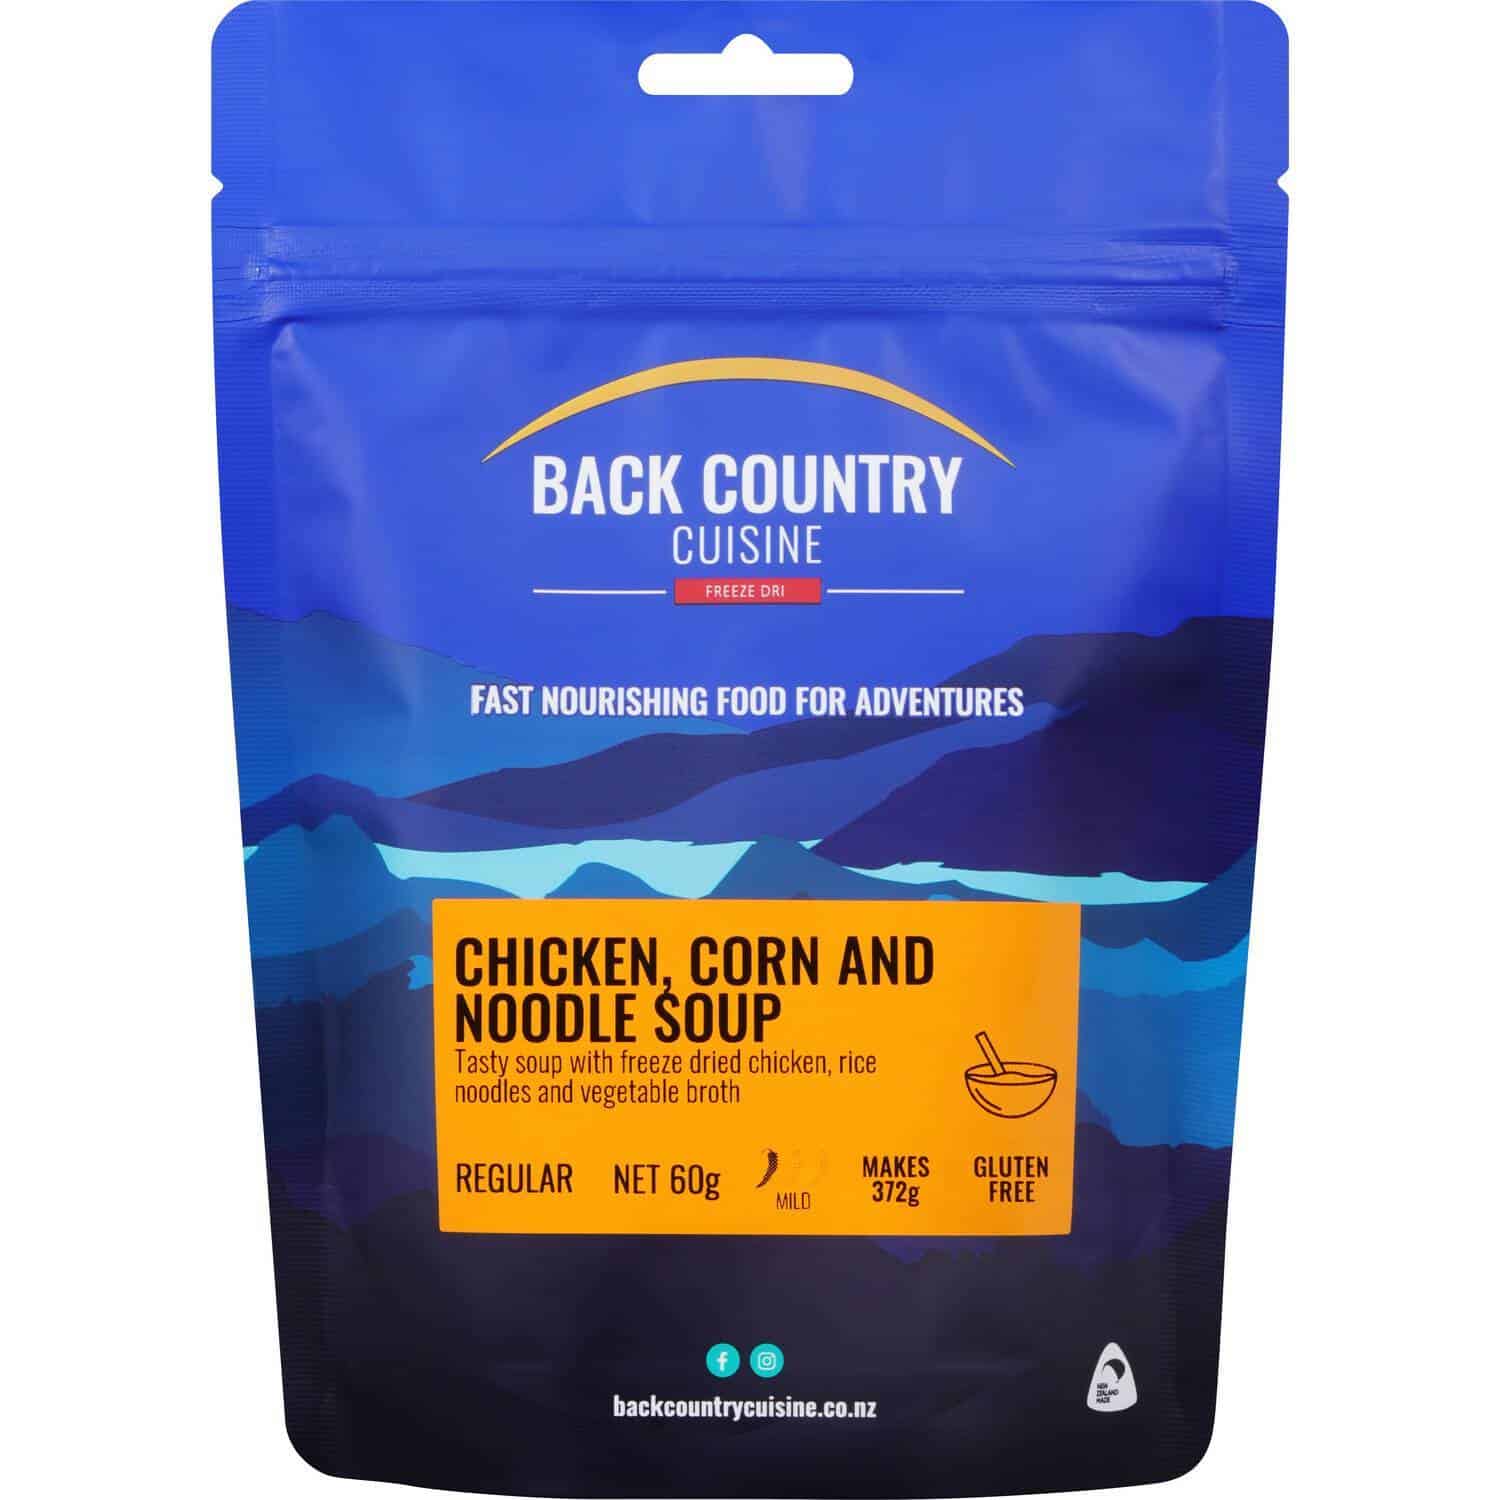 Back Country Cuisine Chicken, Corn & Noodle Soup - Tramping Food and Accessories sold by Venture Outdoors NZ